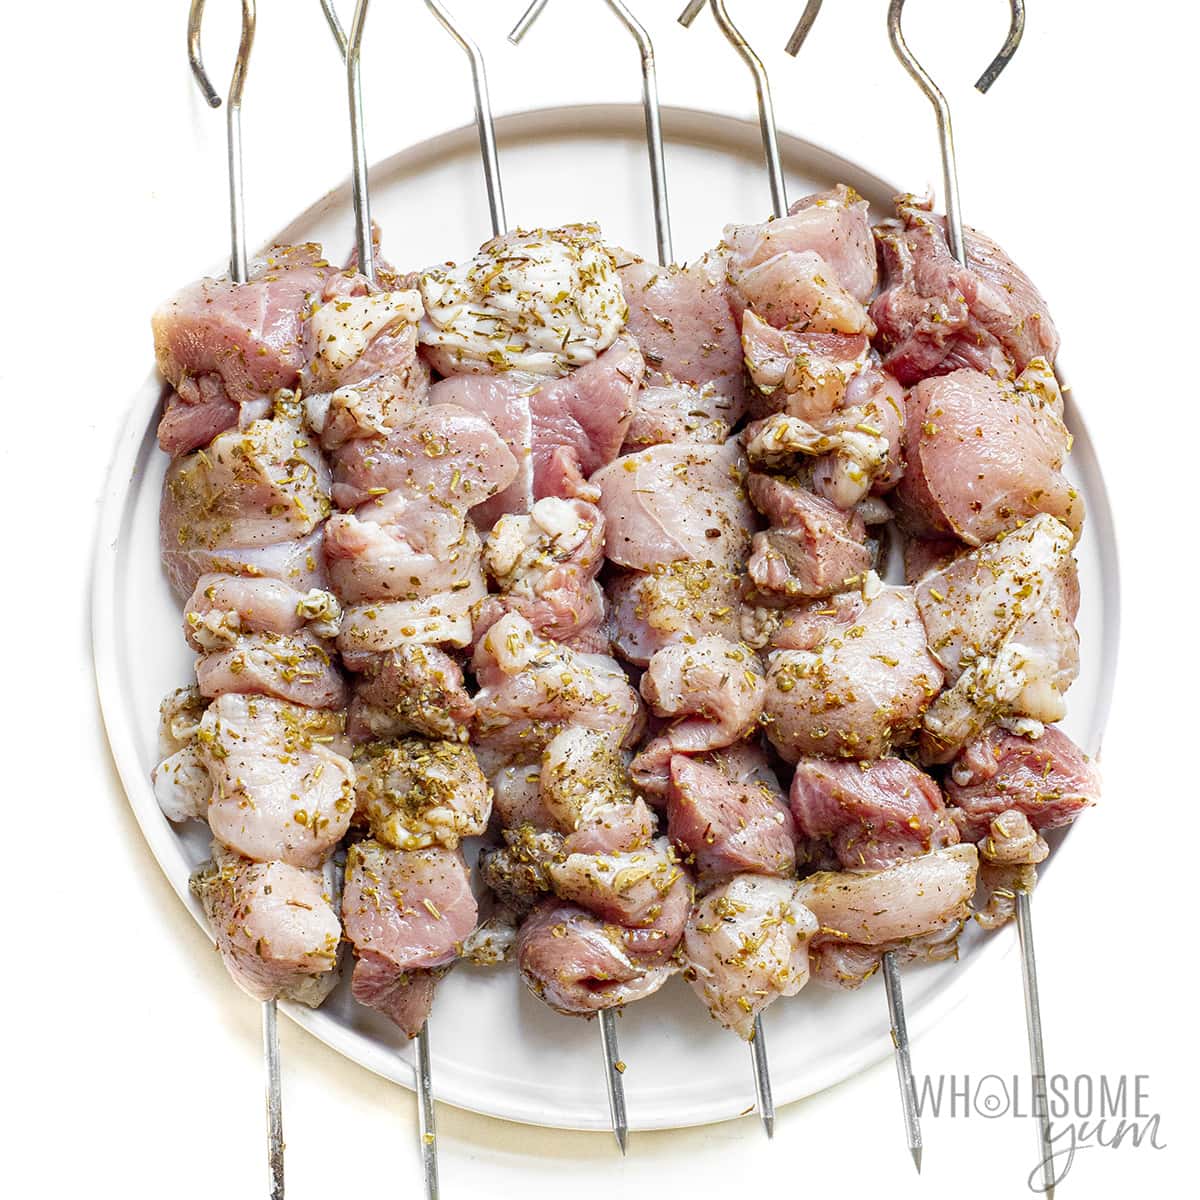 Pork pieces placed on skewers.